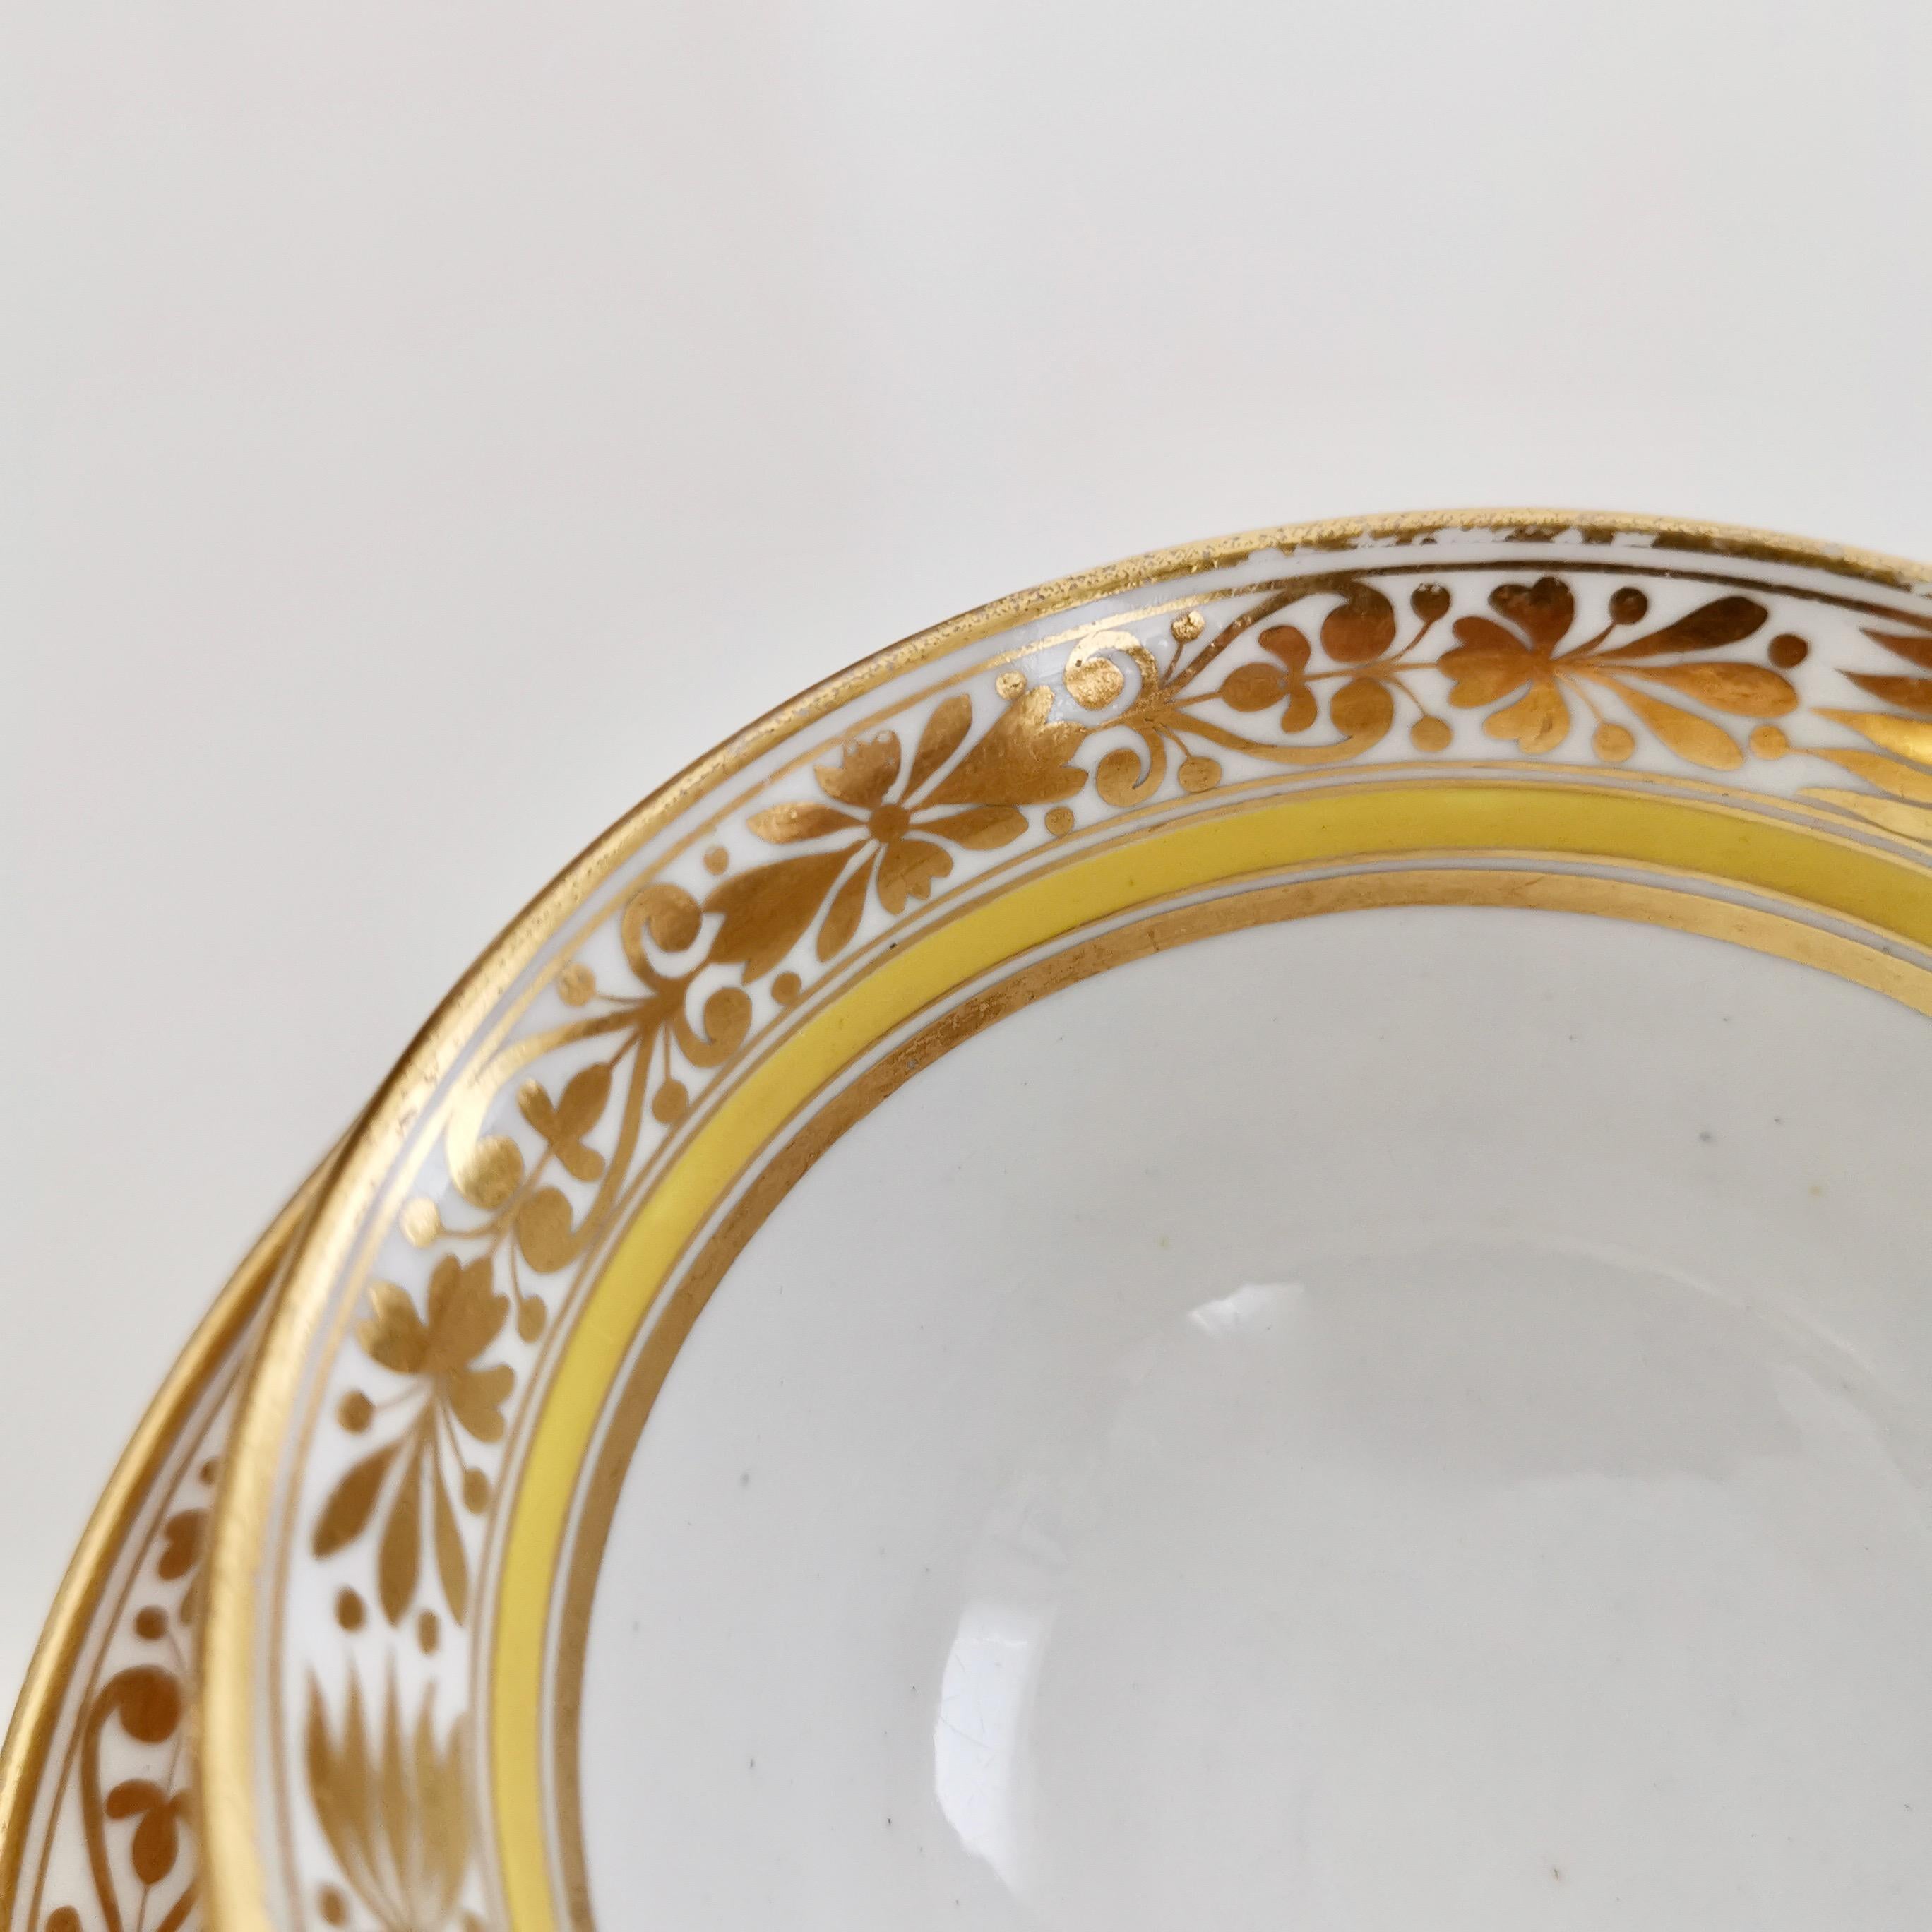 Spode Porcelain Teacup Set, Gilt, Yellow and Red Regency Pattern, circa 1815 11